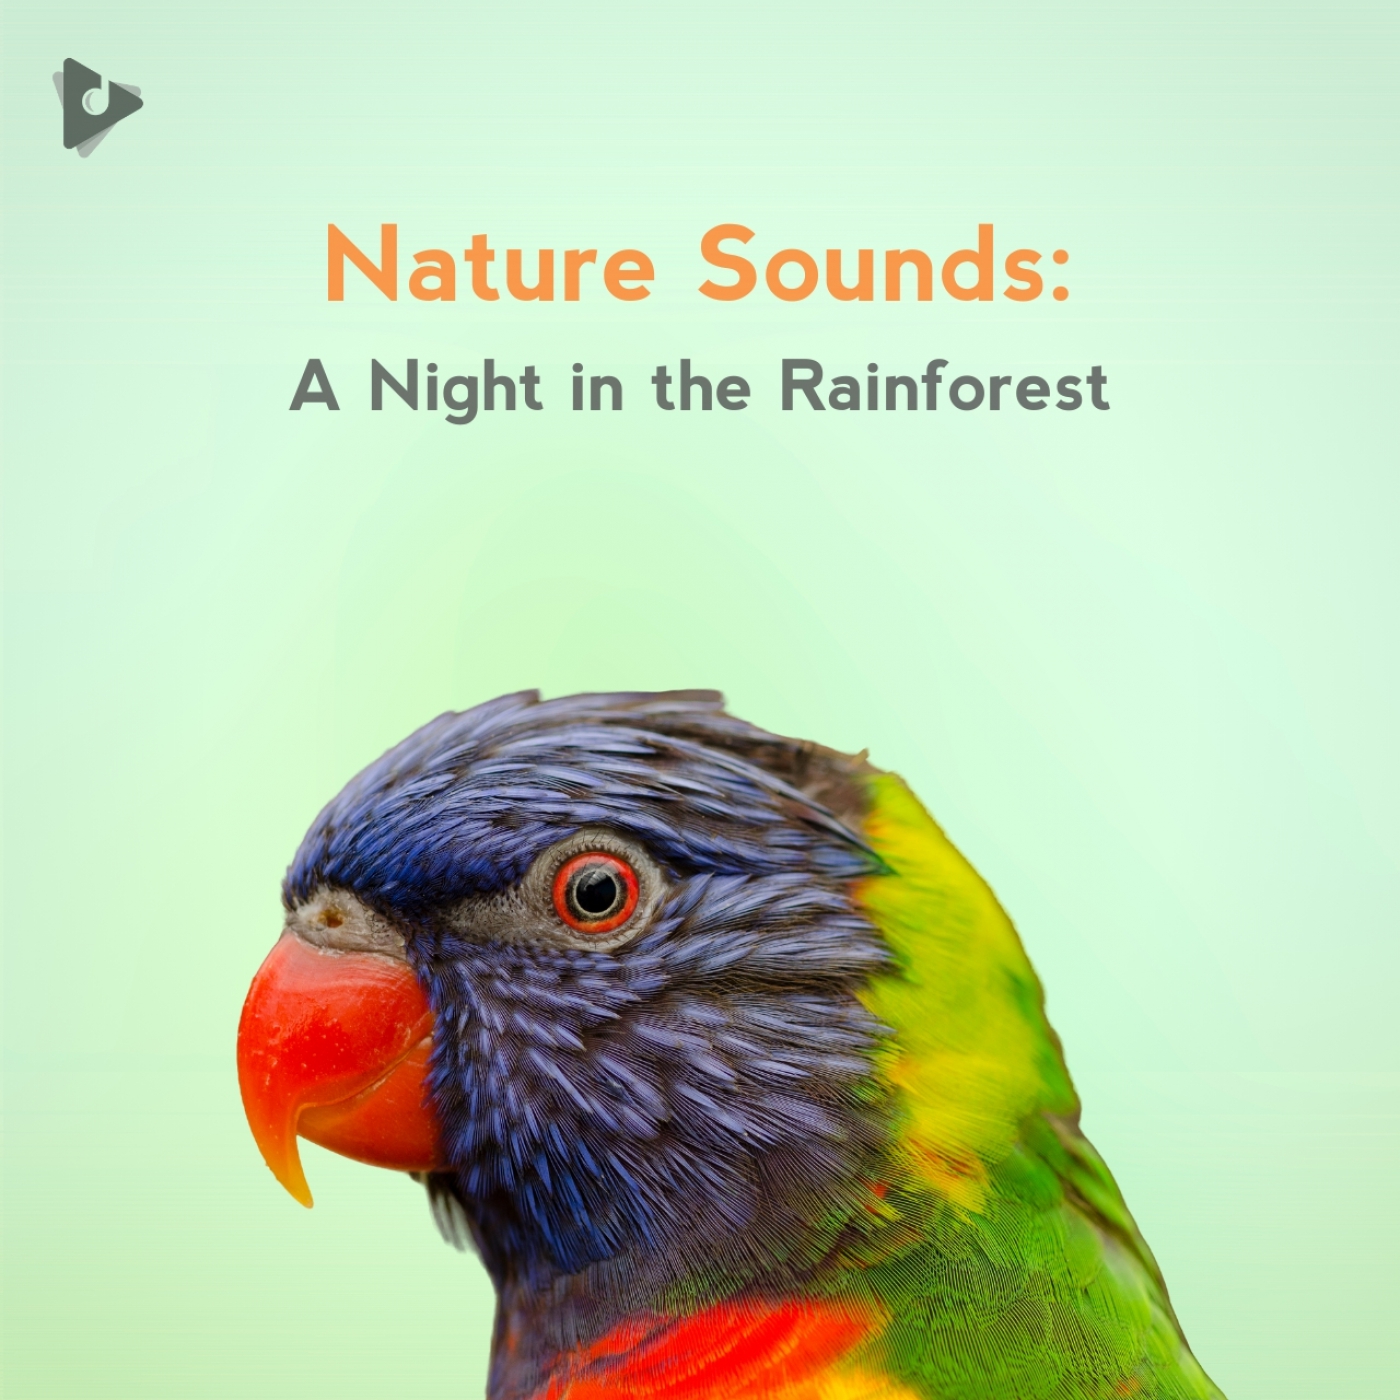 Nature Sounds: A Night in the Rainforest